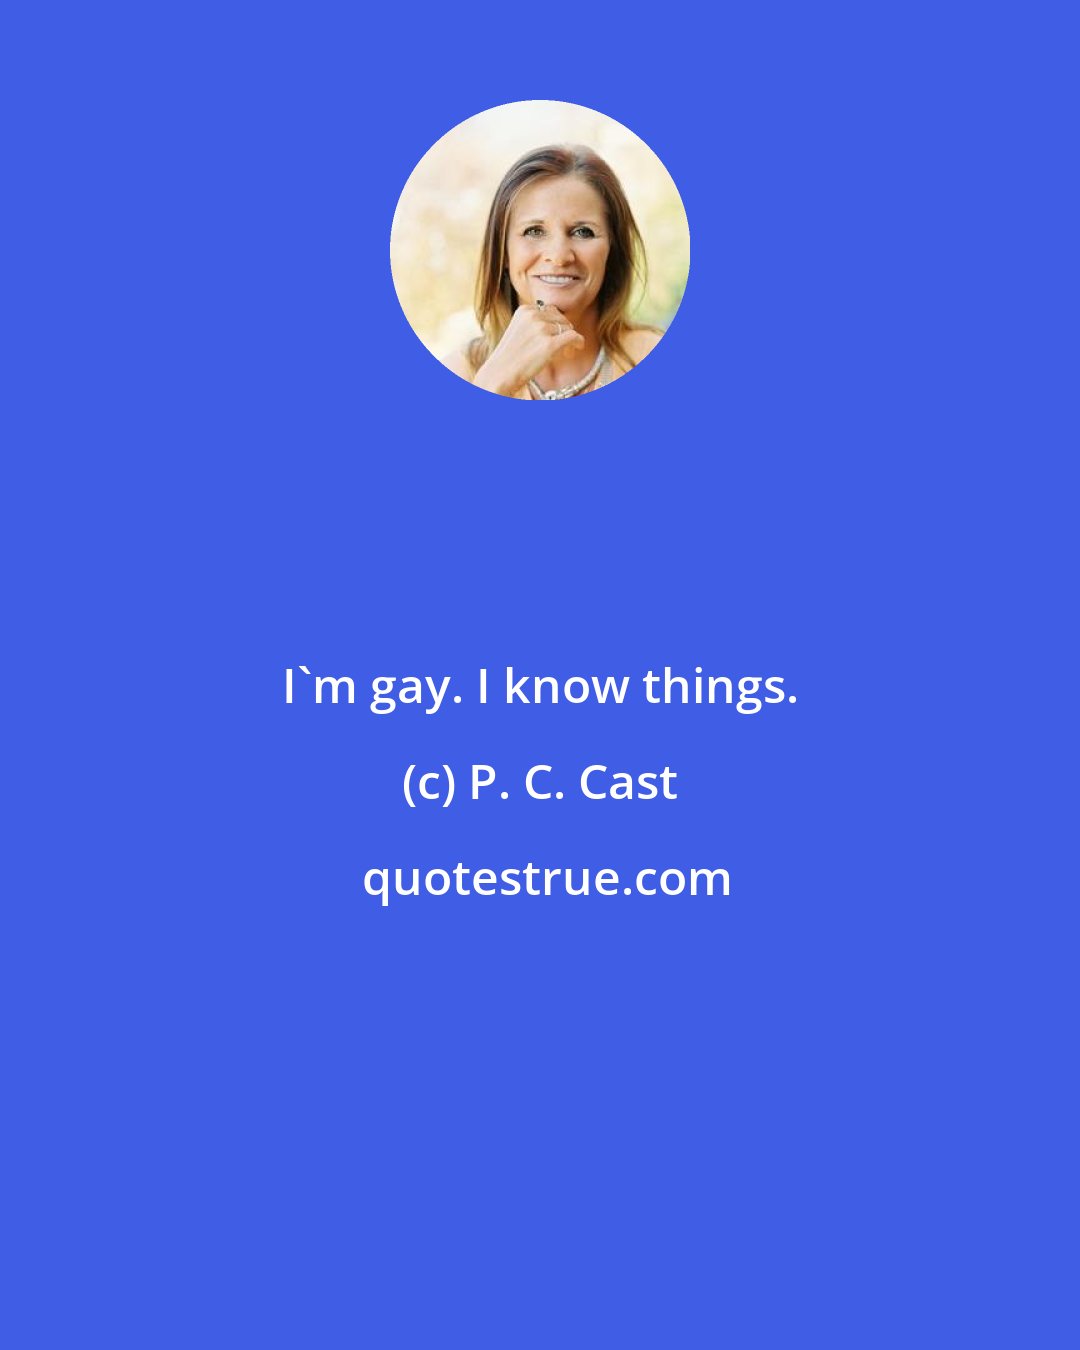 P. C. Cast: I'm gay. I know things.